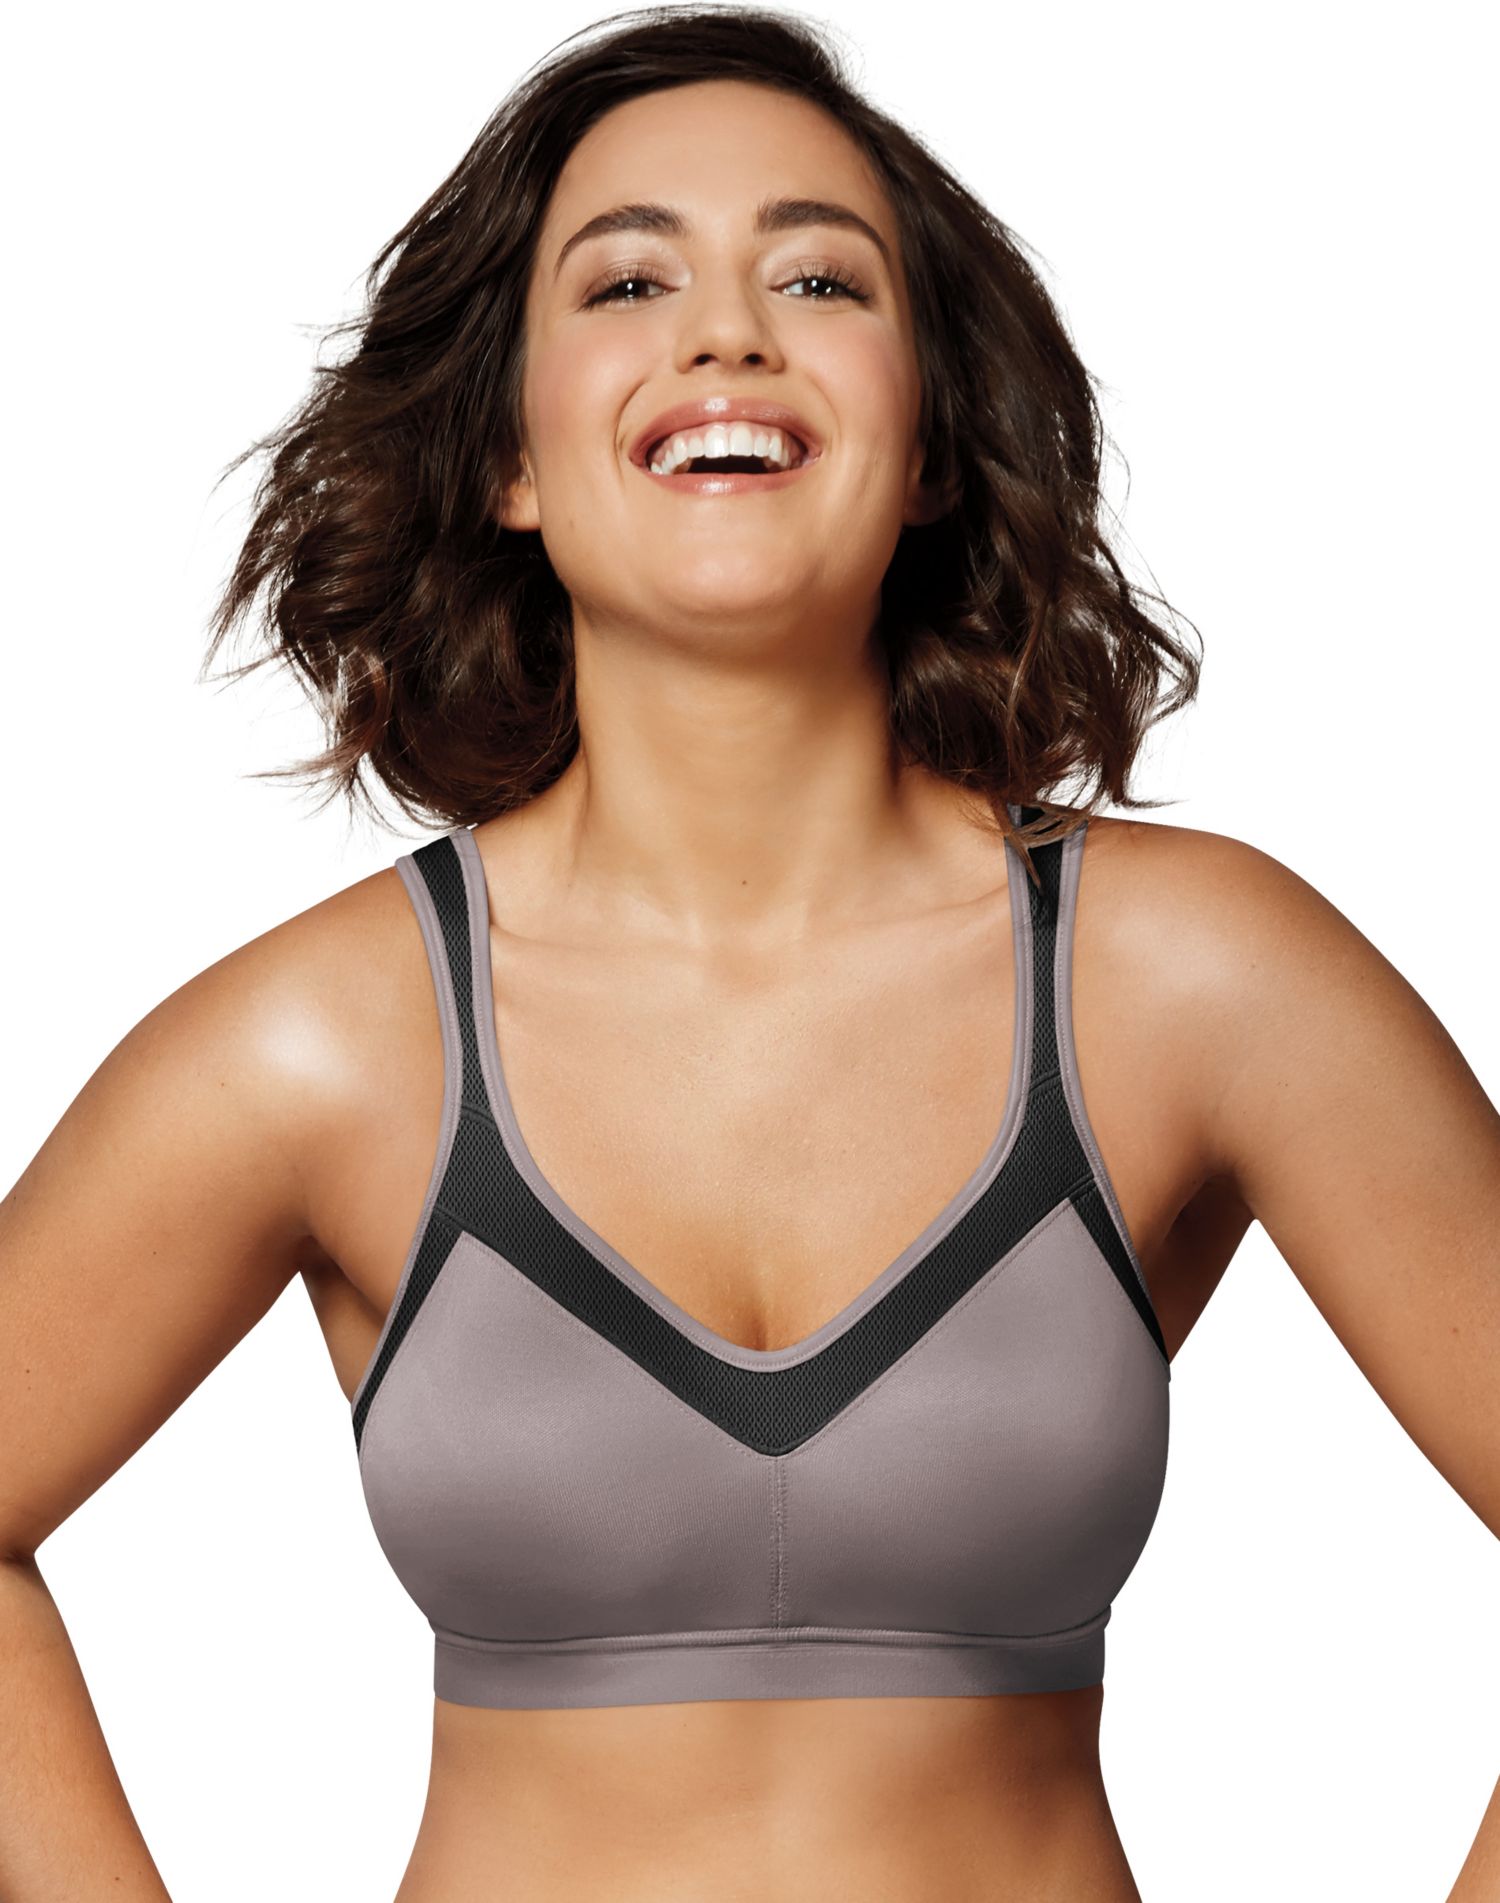 Playtex 18 Hour Active Lifestyle Wirefree Bra 4159 36D White